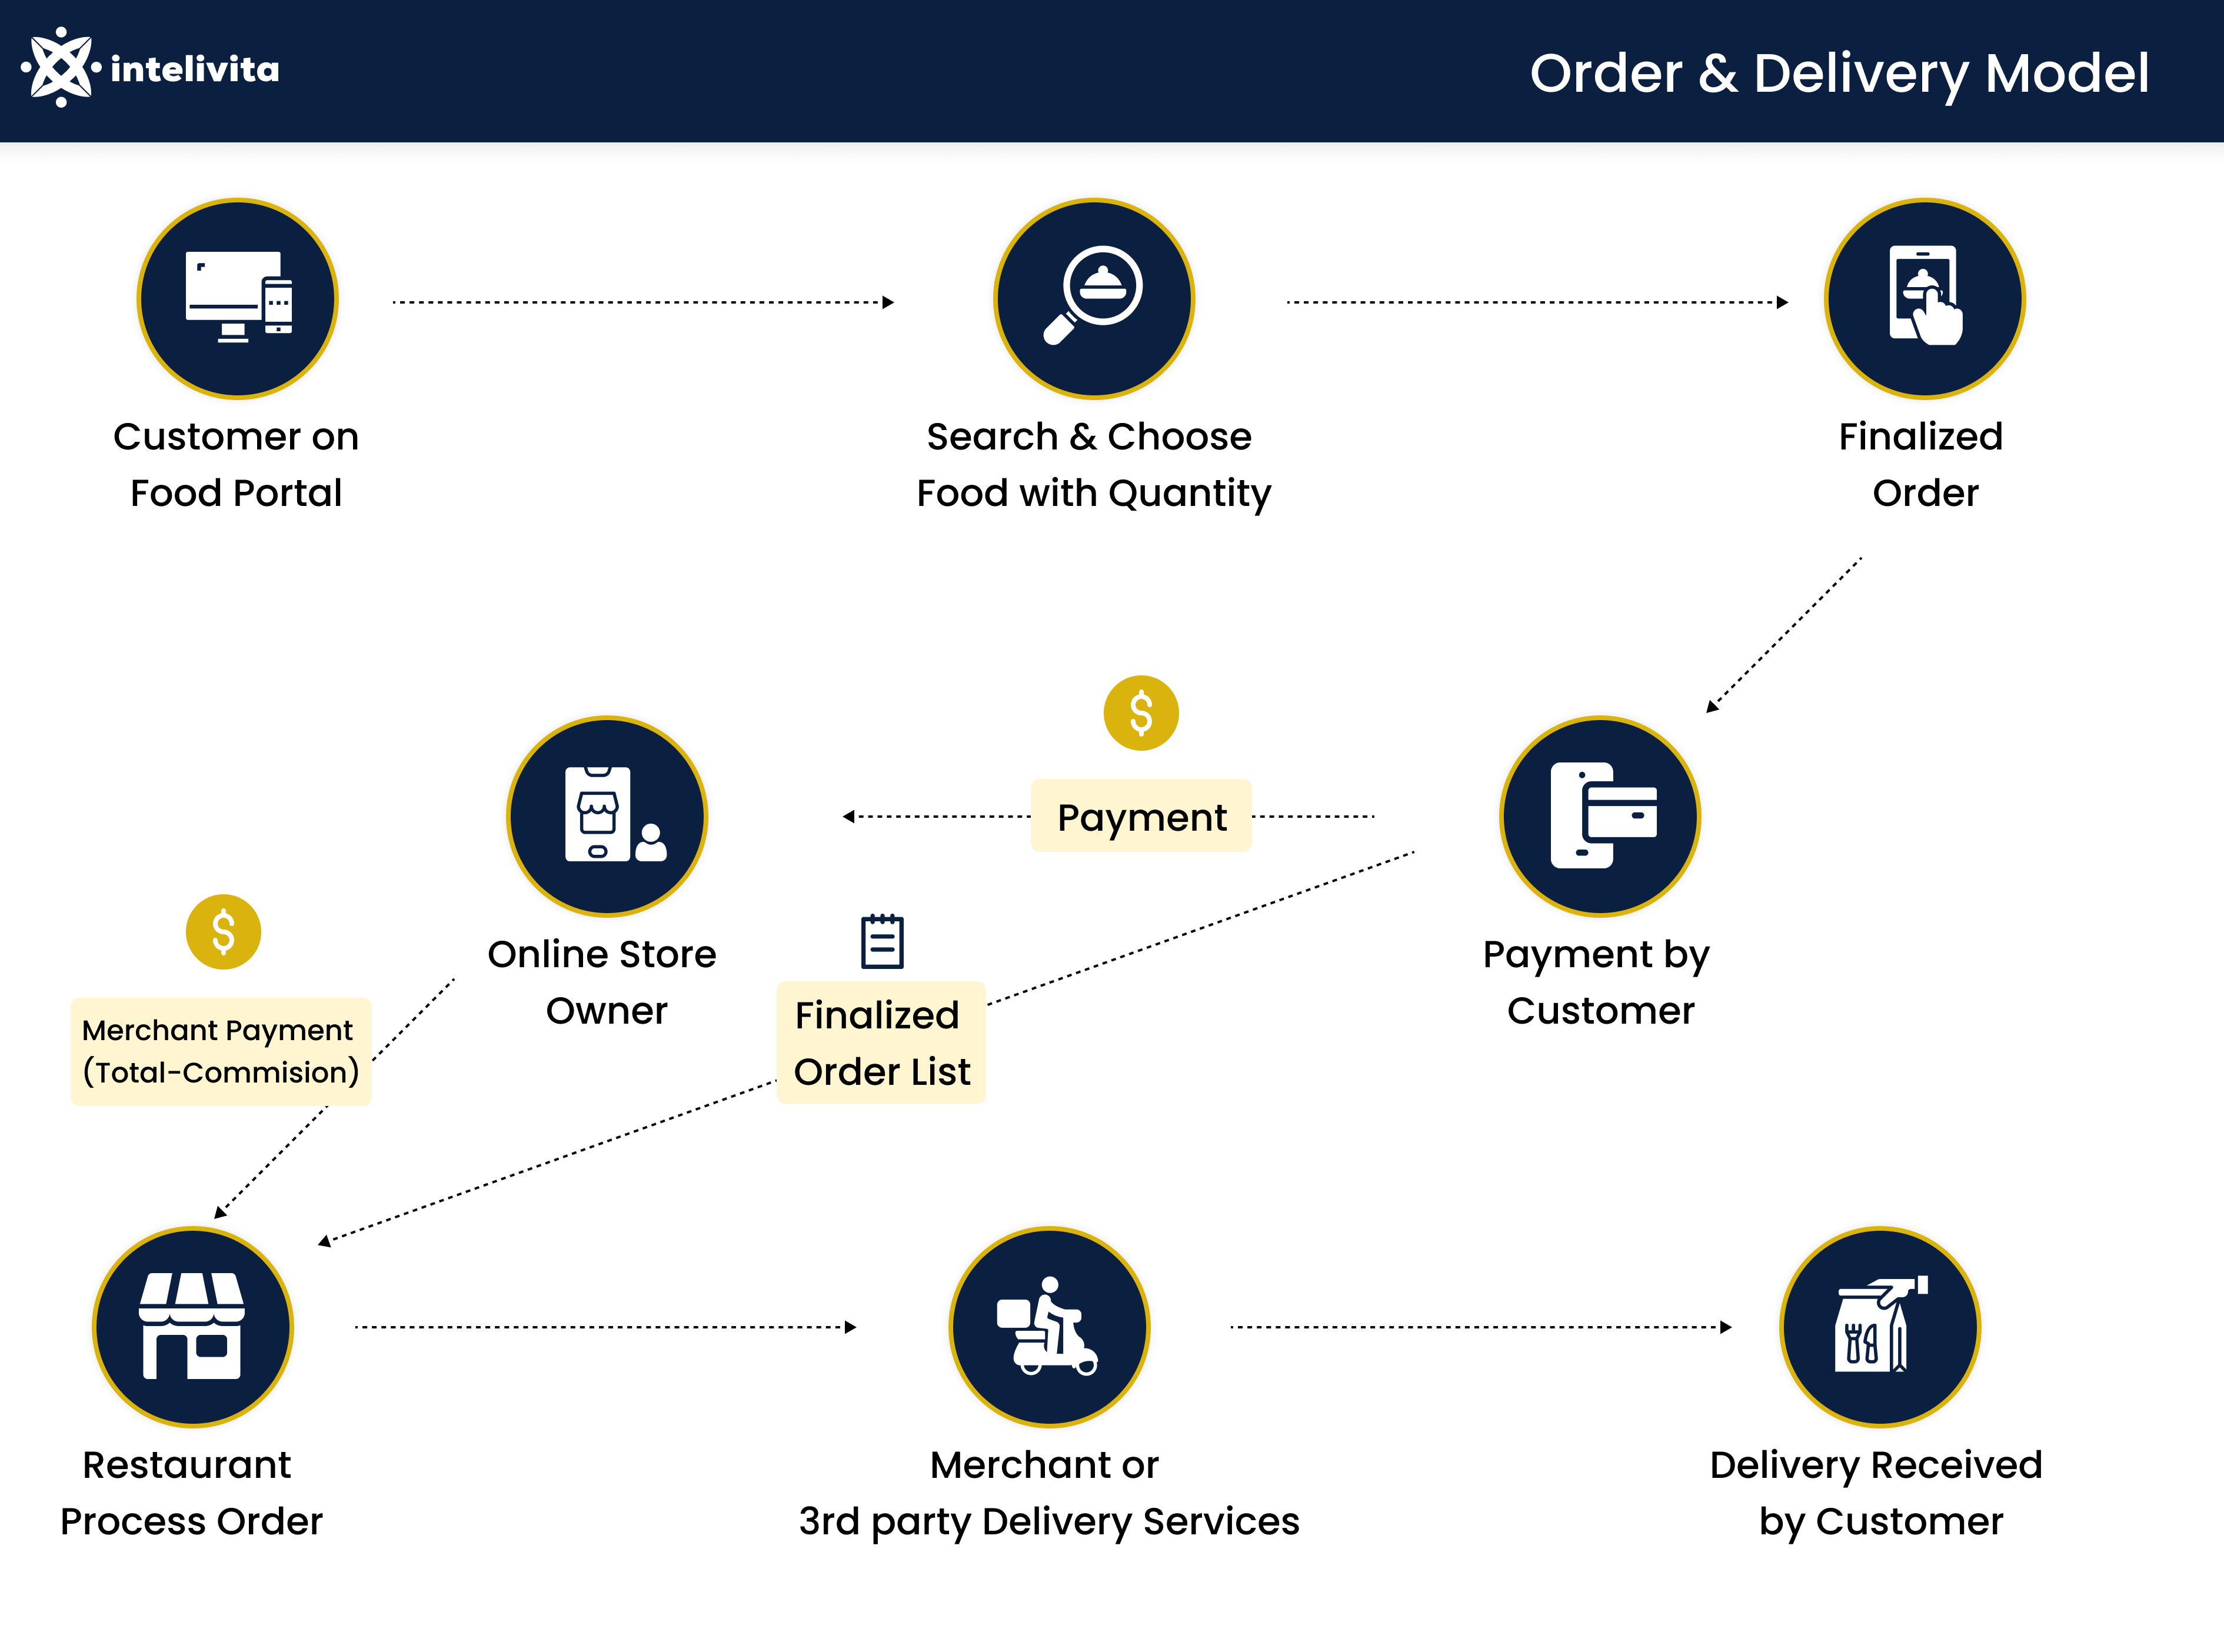 delivery system in business plan